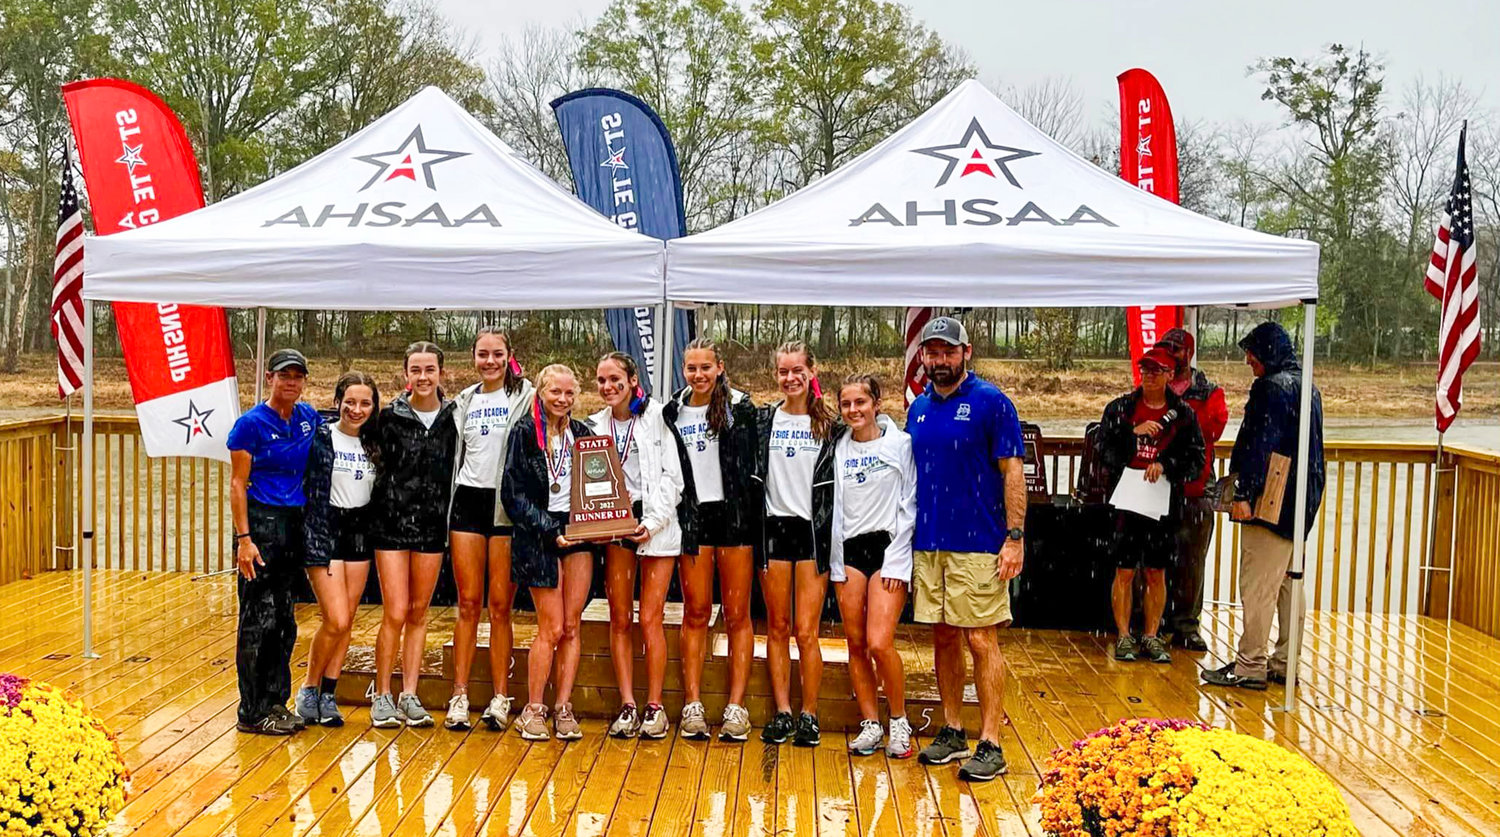 The Bayside Academy Lady Admirals claimed a Red Map trophy for finishing second place in the team competition at Saturday’s AHSAA cross country state championship meet in Oakville. Bayside Academy’s state representatives included Catherine Doyle, Annie Midyett, Grace Dawson, Shelby Fargason, Amelia Wells, Presley Putnam and Virginia McCrory.